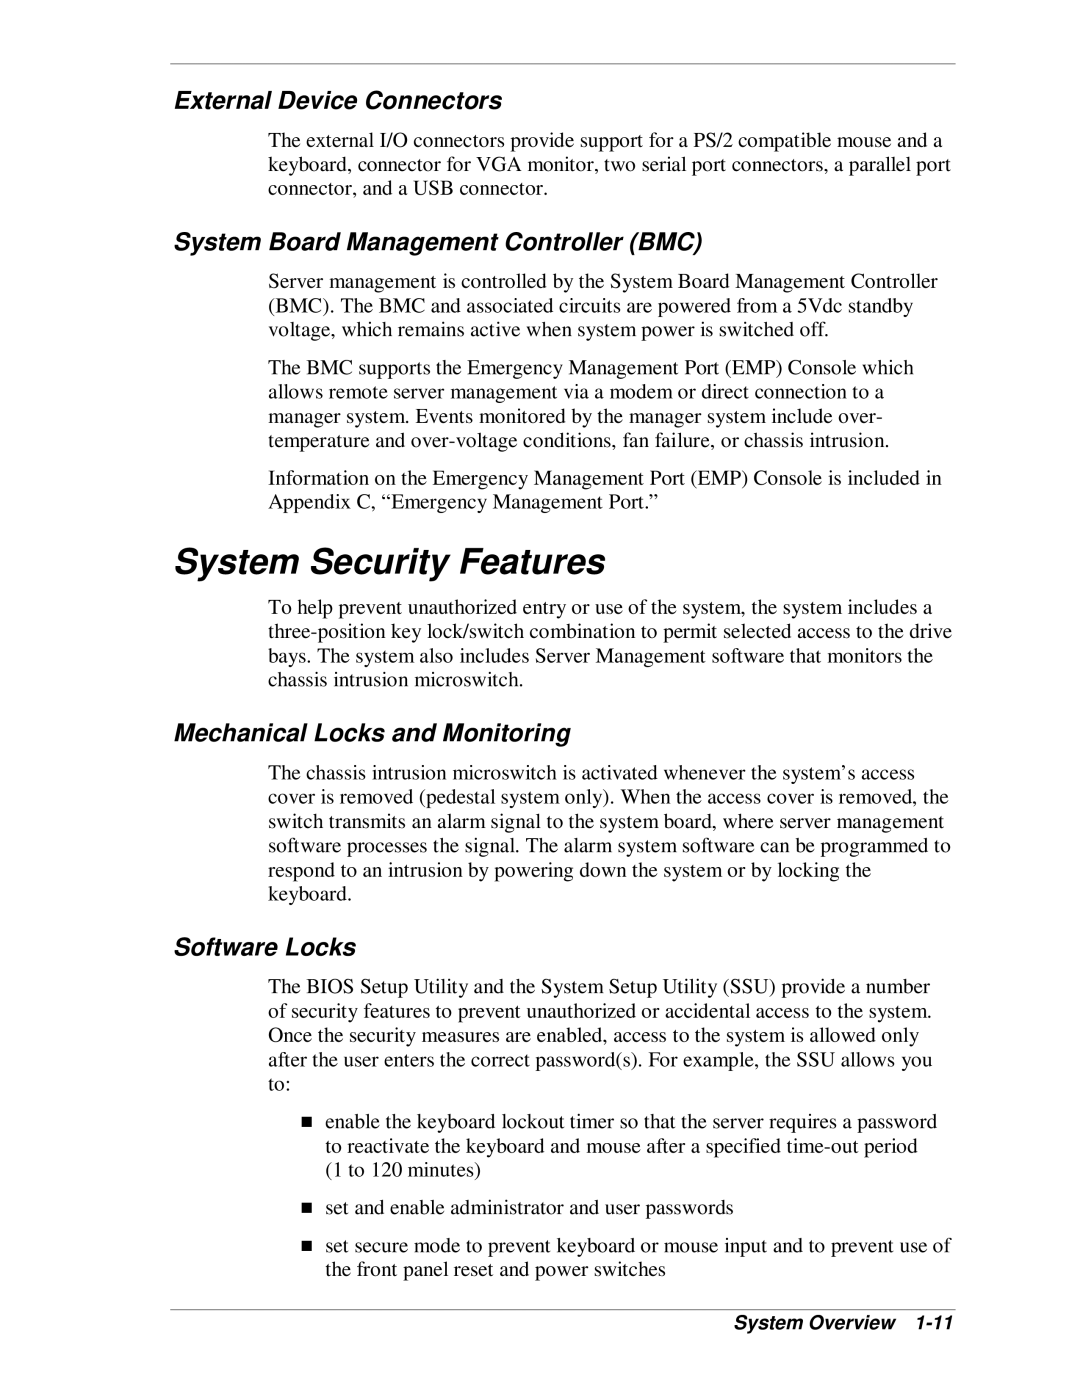 NEC MH4500 System Security Features, External Device Connectors, System Board Management Controller BMC, Software Locks 